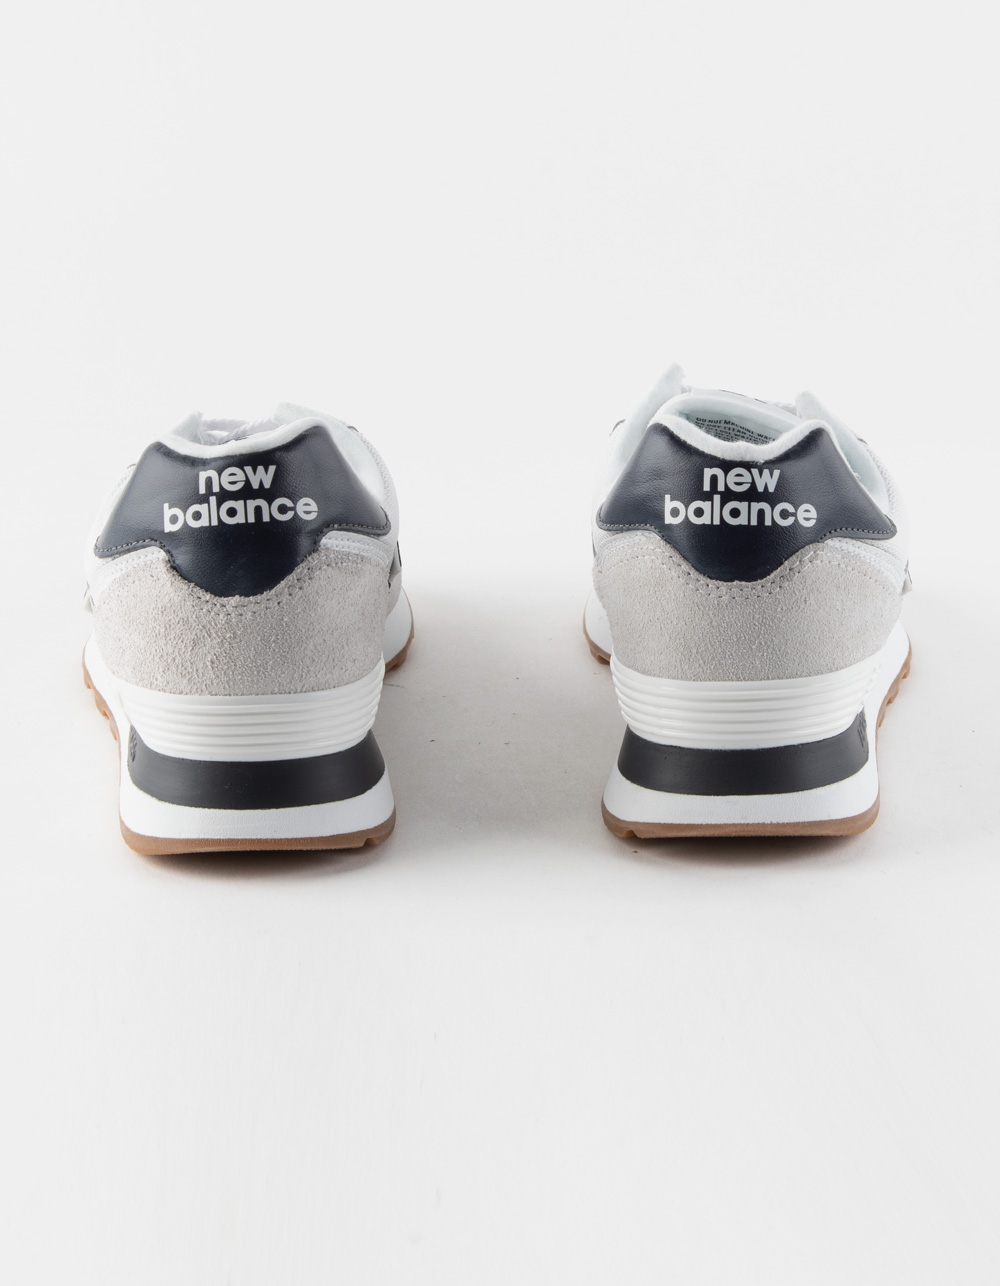 NEW BALANCE 574 Mens Shoes - WHT/NVY | Tillys